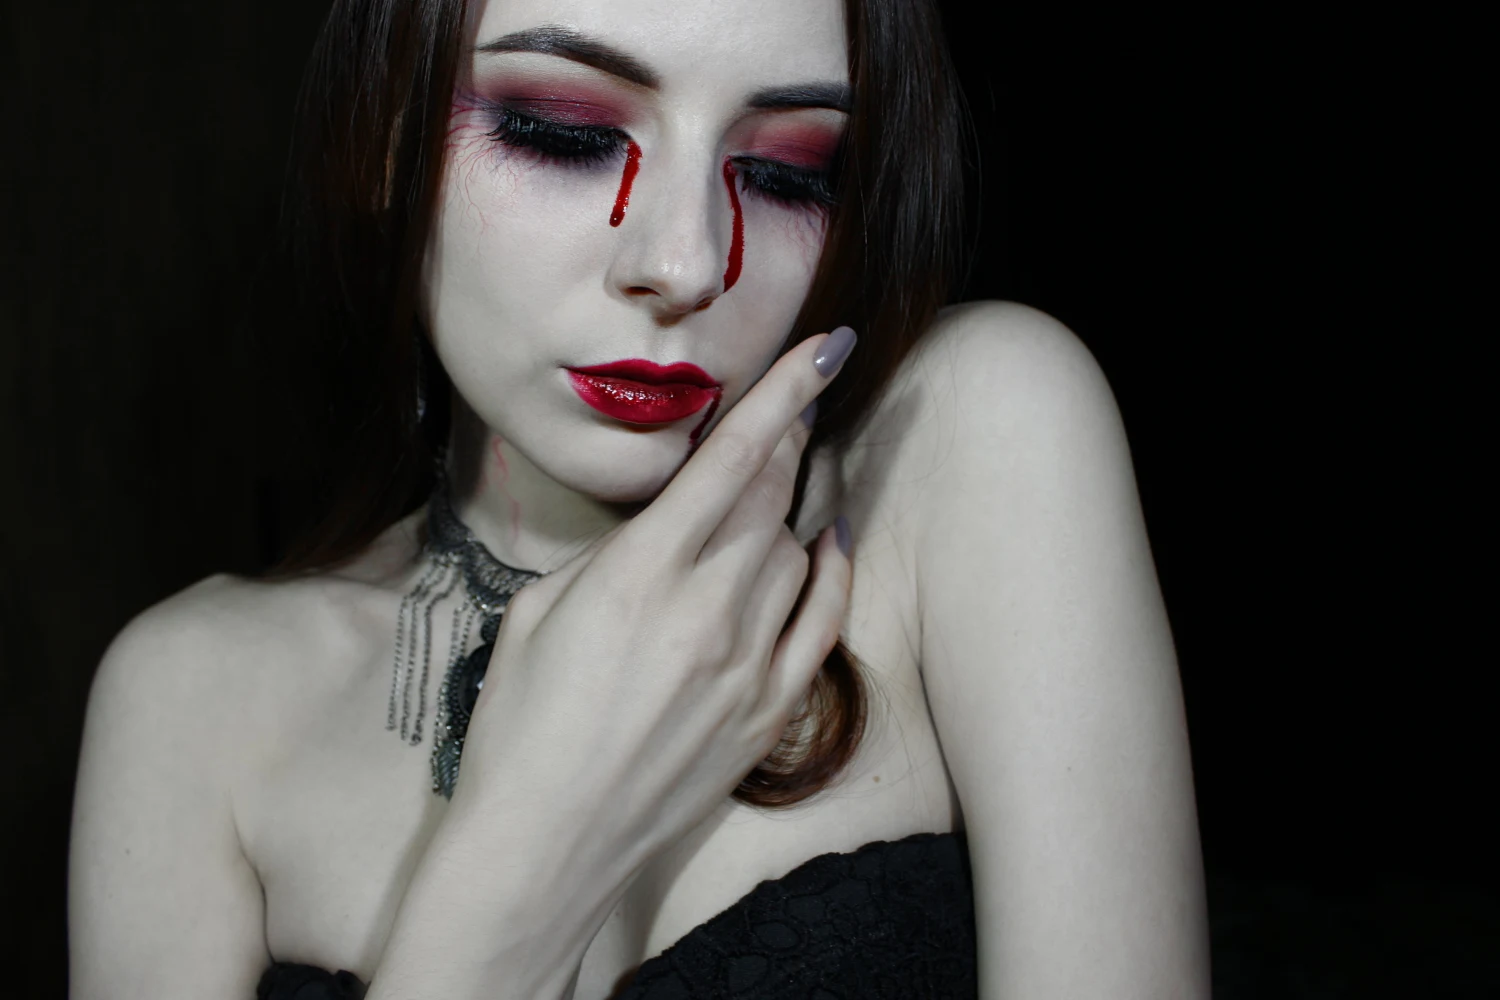 a close-up of pale woman's face with a dramatic vampire makeup look and false blood tears for Halloween.